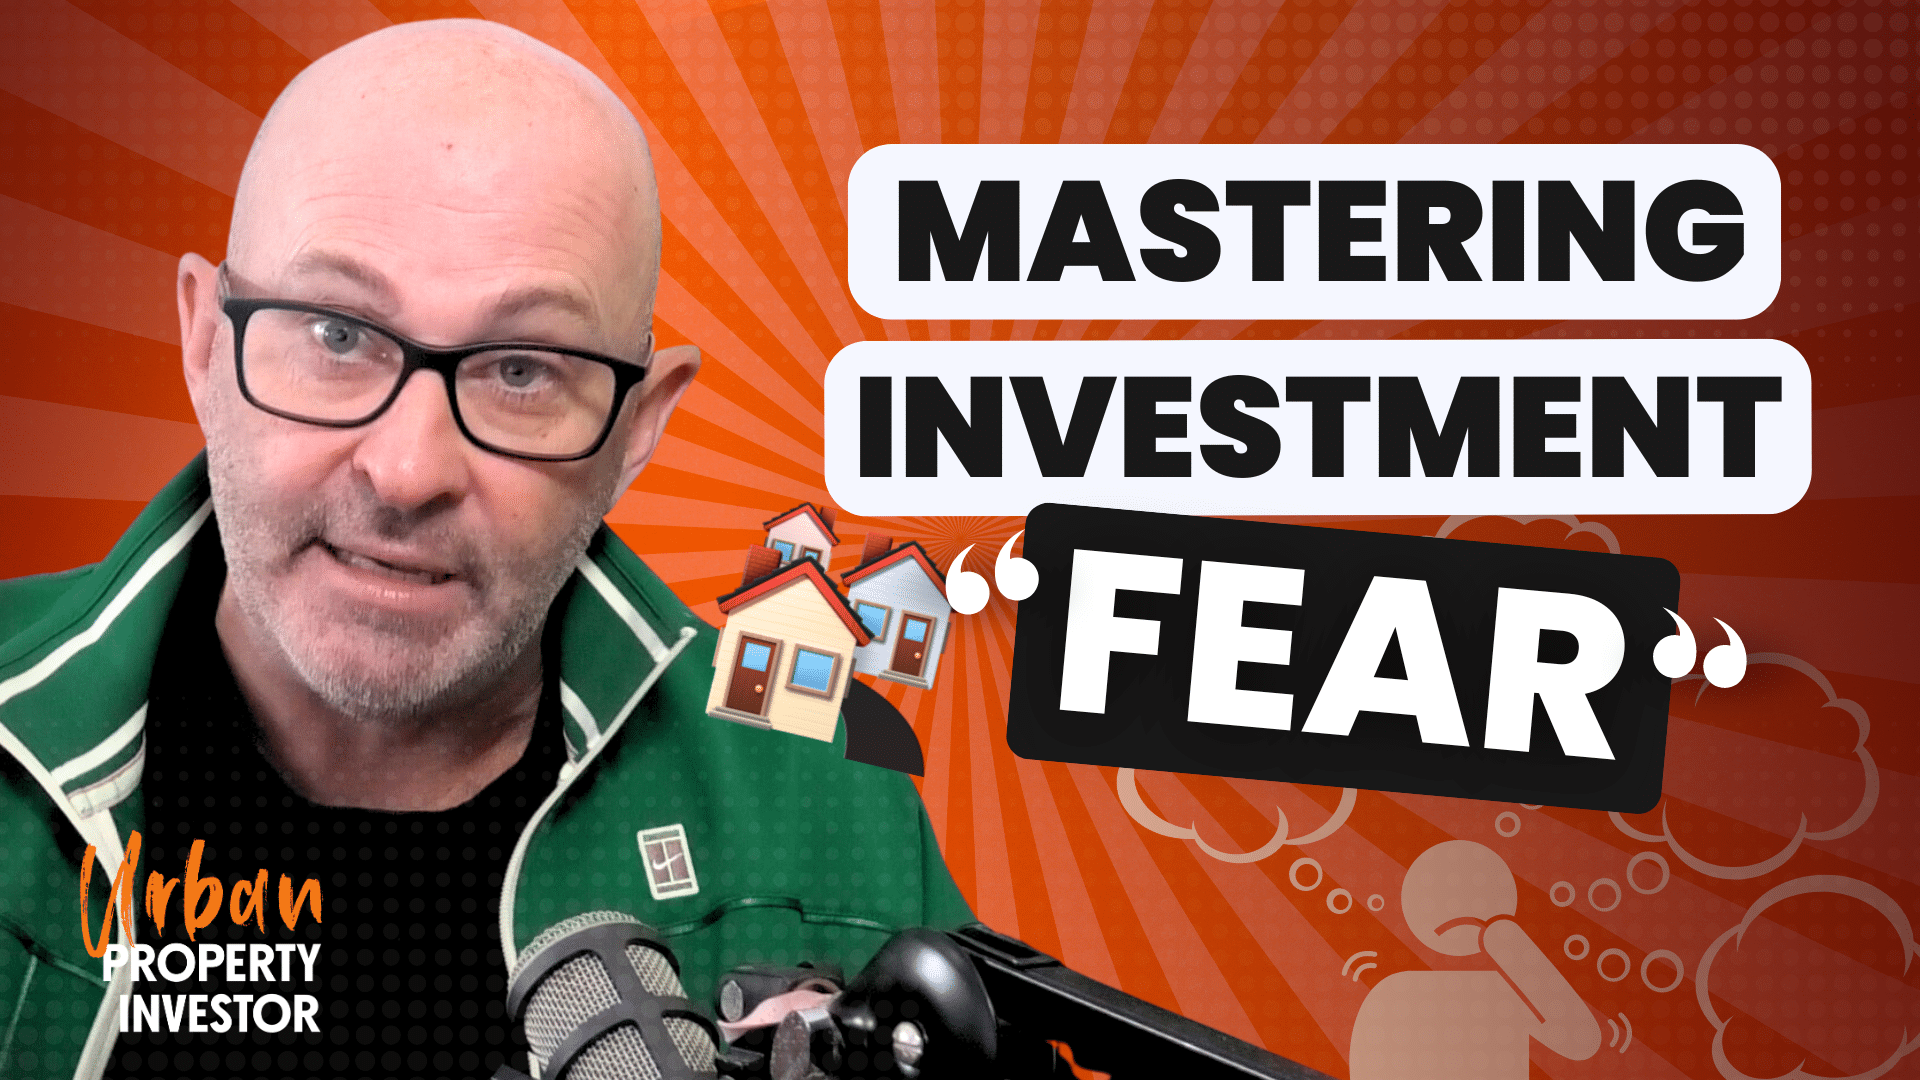 Mastering Investment Fear